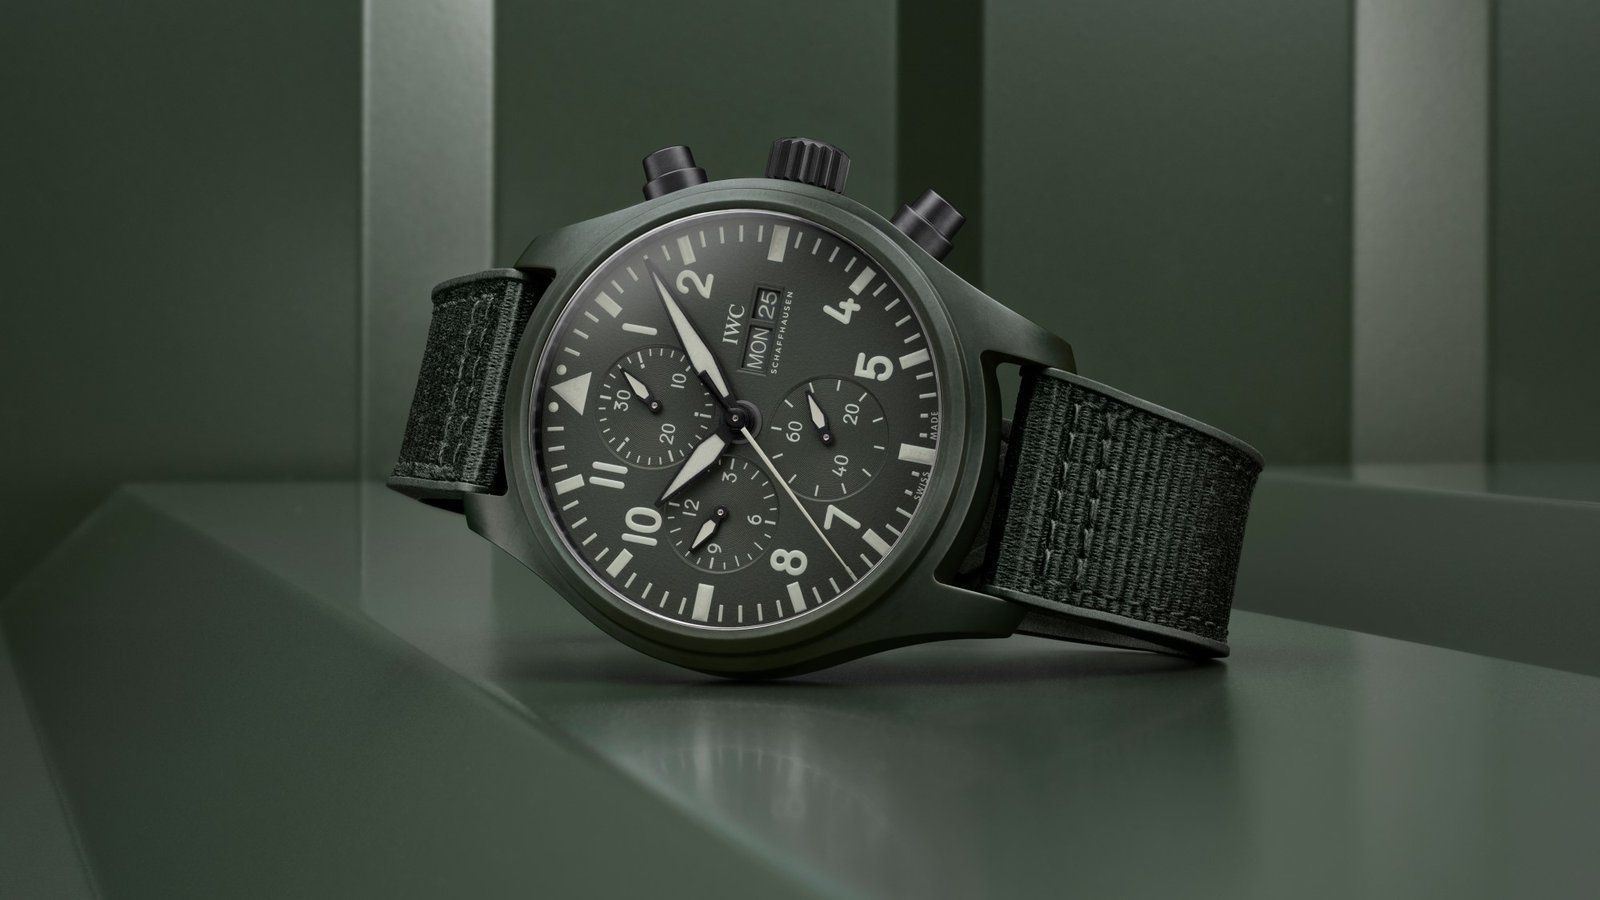 IWC Pilot’s Watch “Woodland” featuring Ceratanium, the Maison’s patented alloy